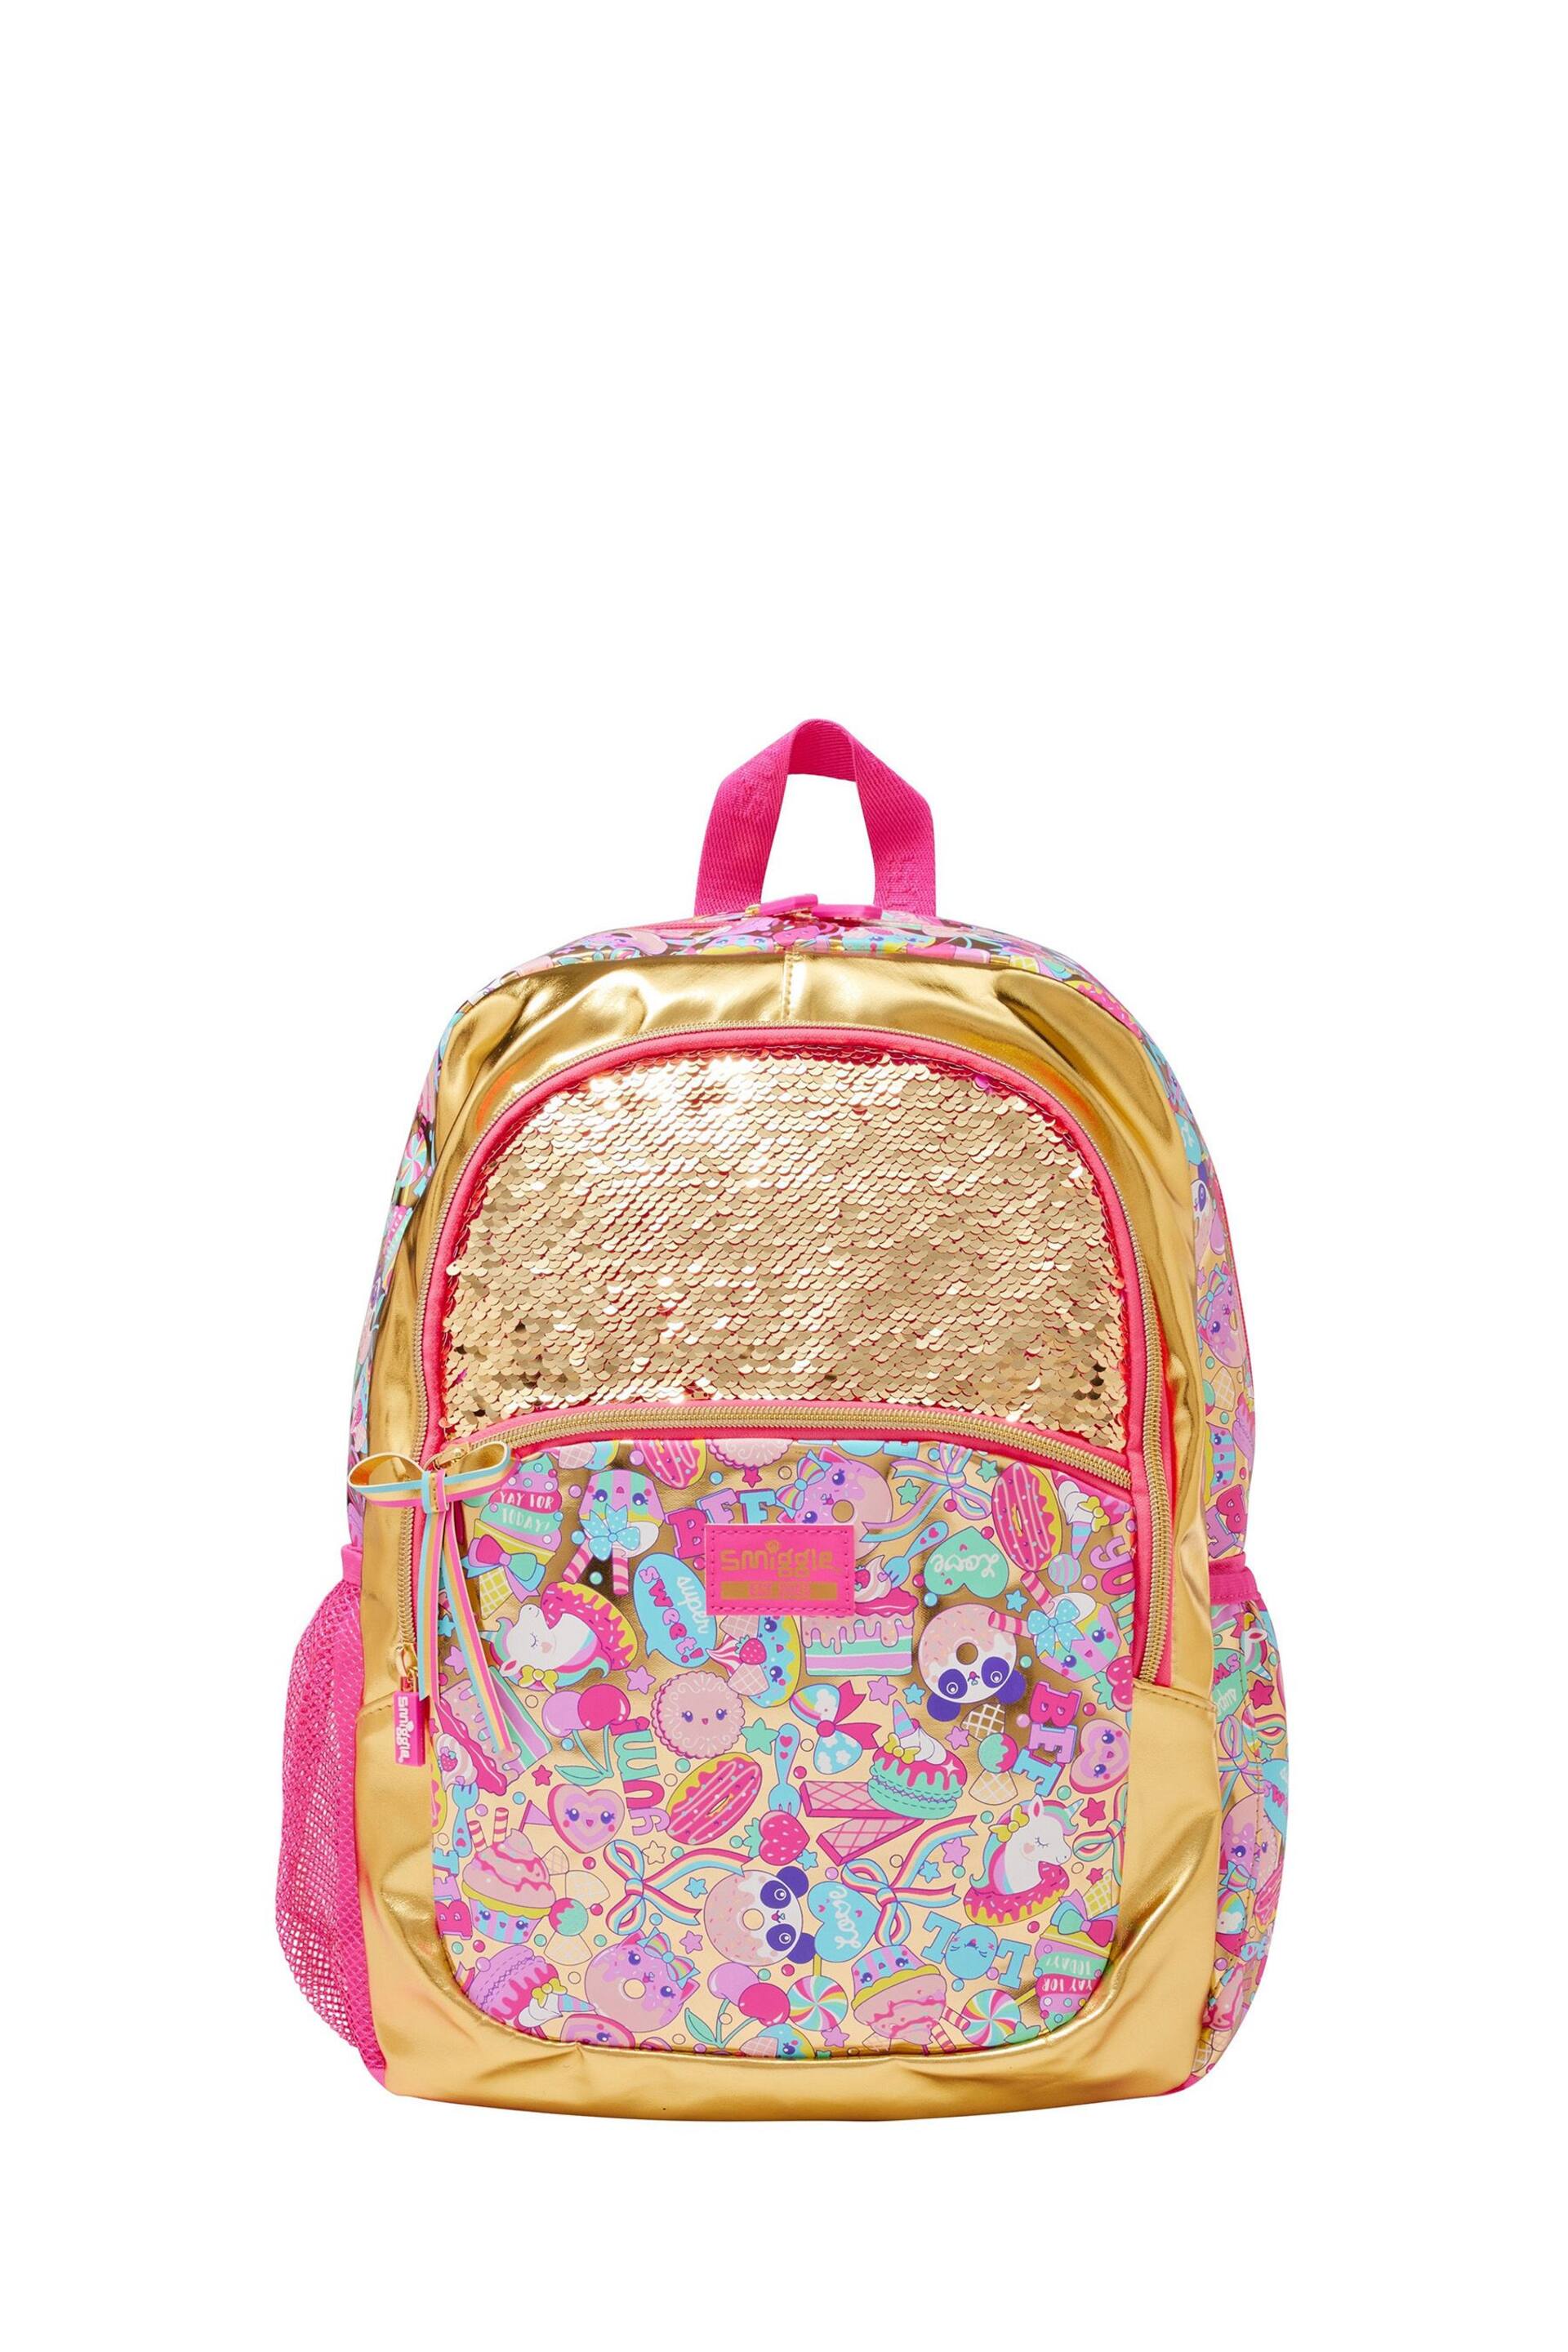 Smiggle Gold 20th Birthday Classic Backpack - Image 1 of 4